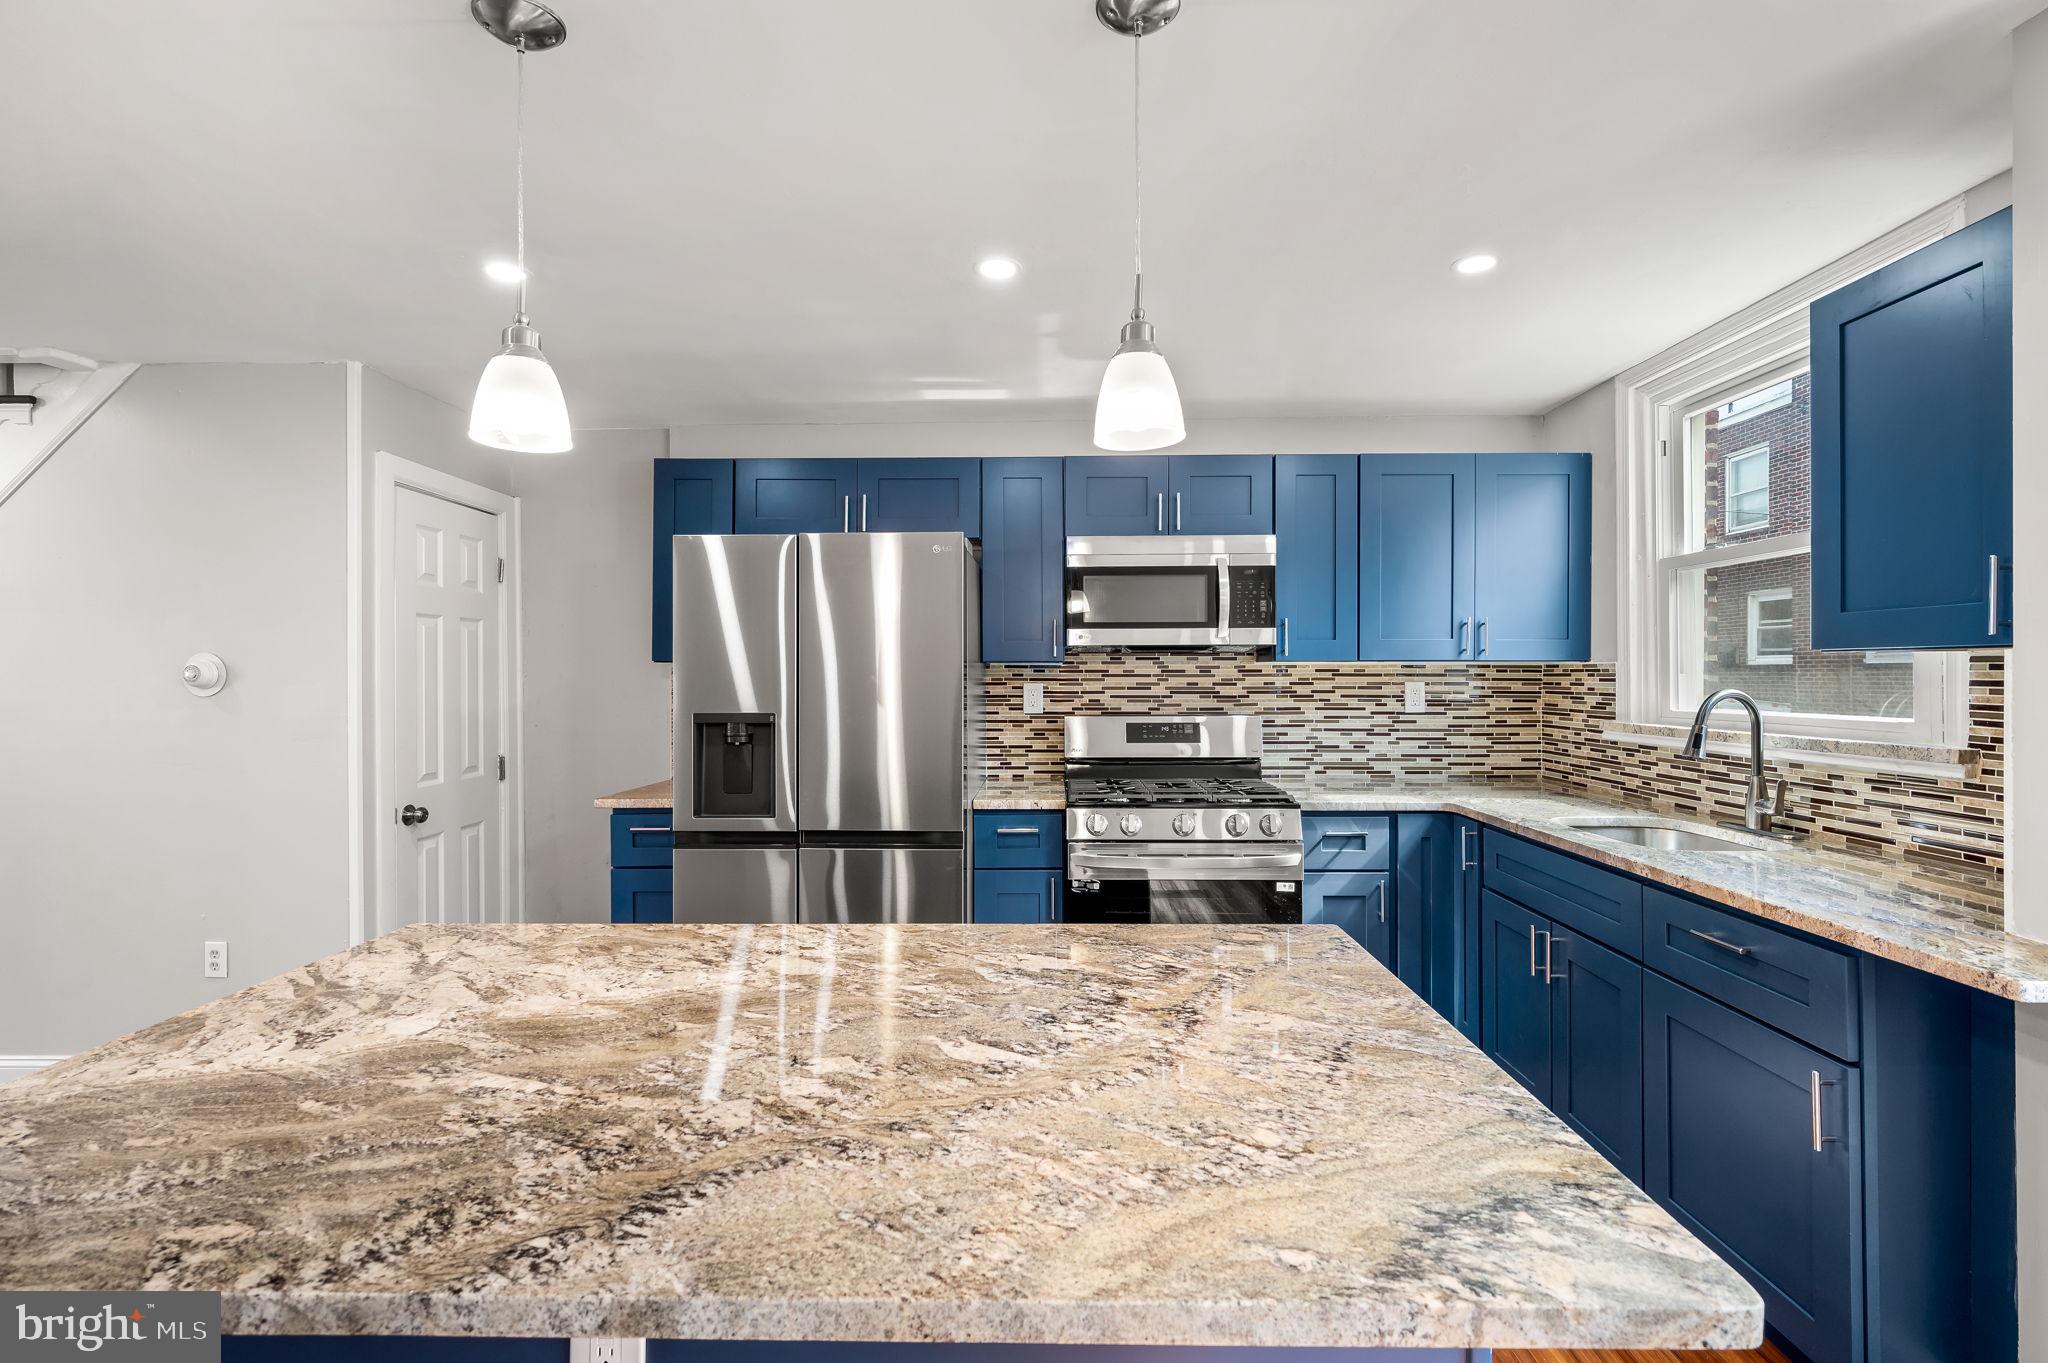 a kitchen with stainless steel appliances kitchen island granite countertop a refrigerator sink and cabinets